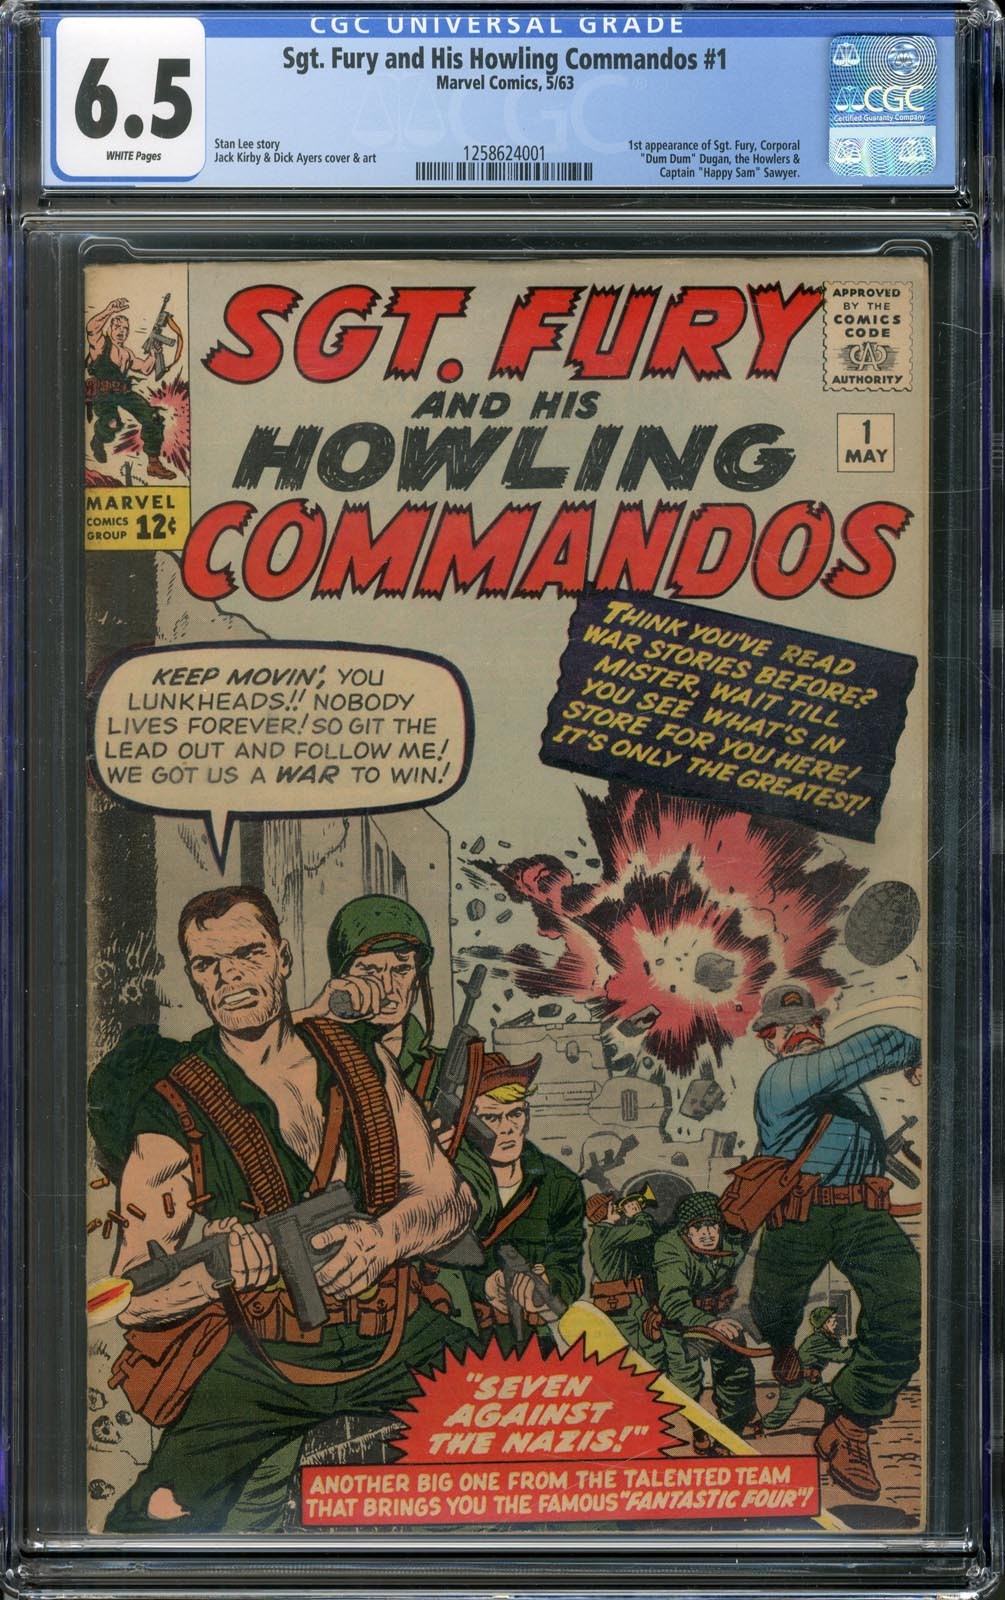 - 1963 Sgt. Fury and His Howling Commandos #1 (CGC 6.5)